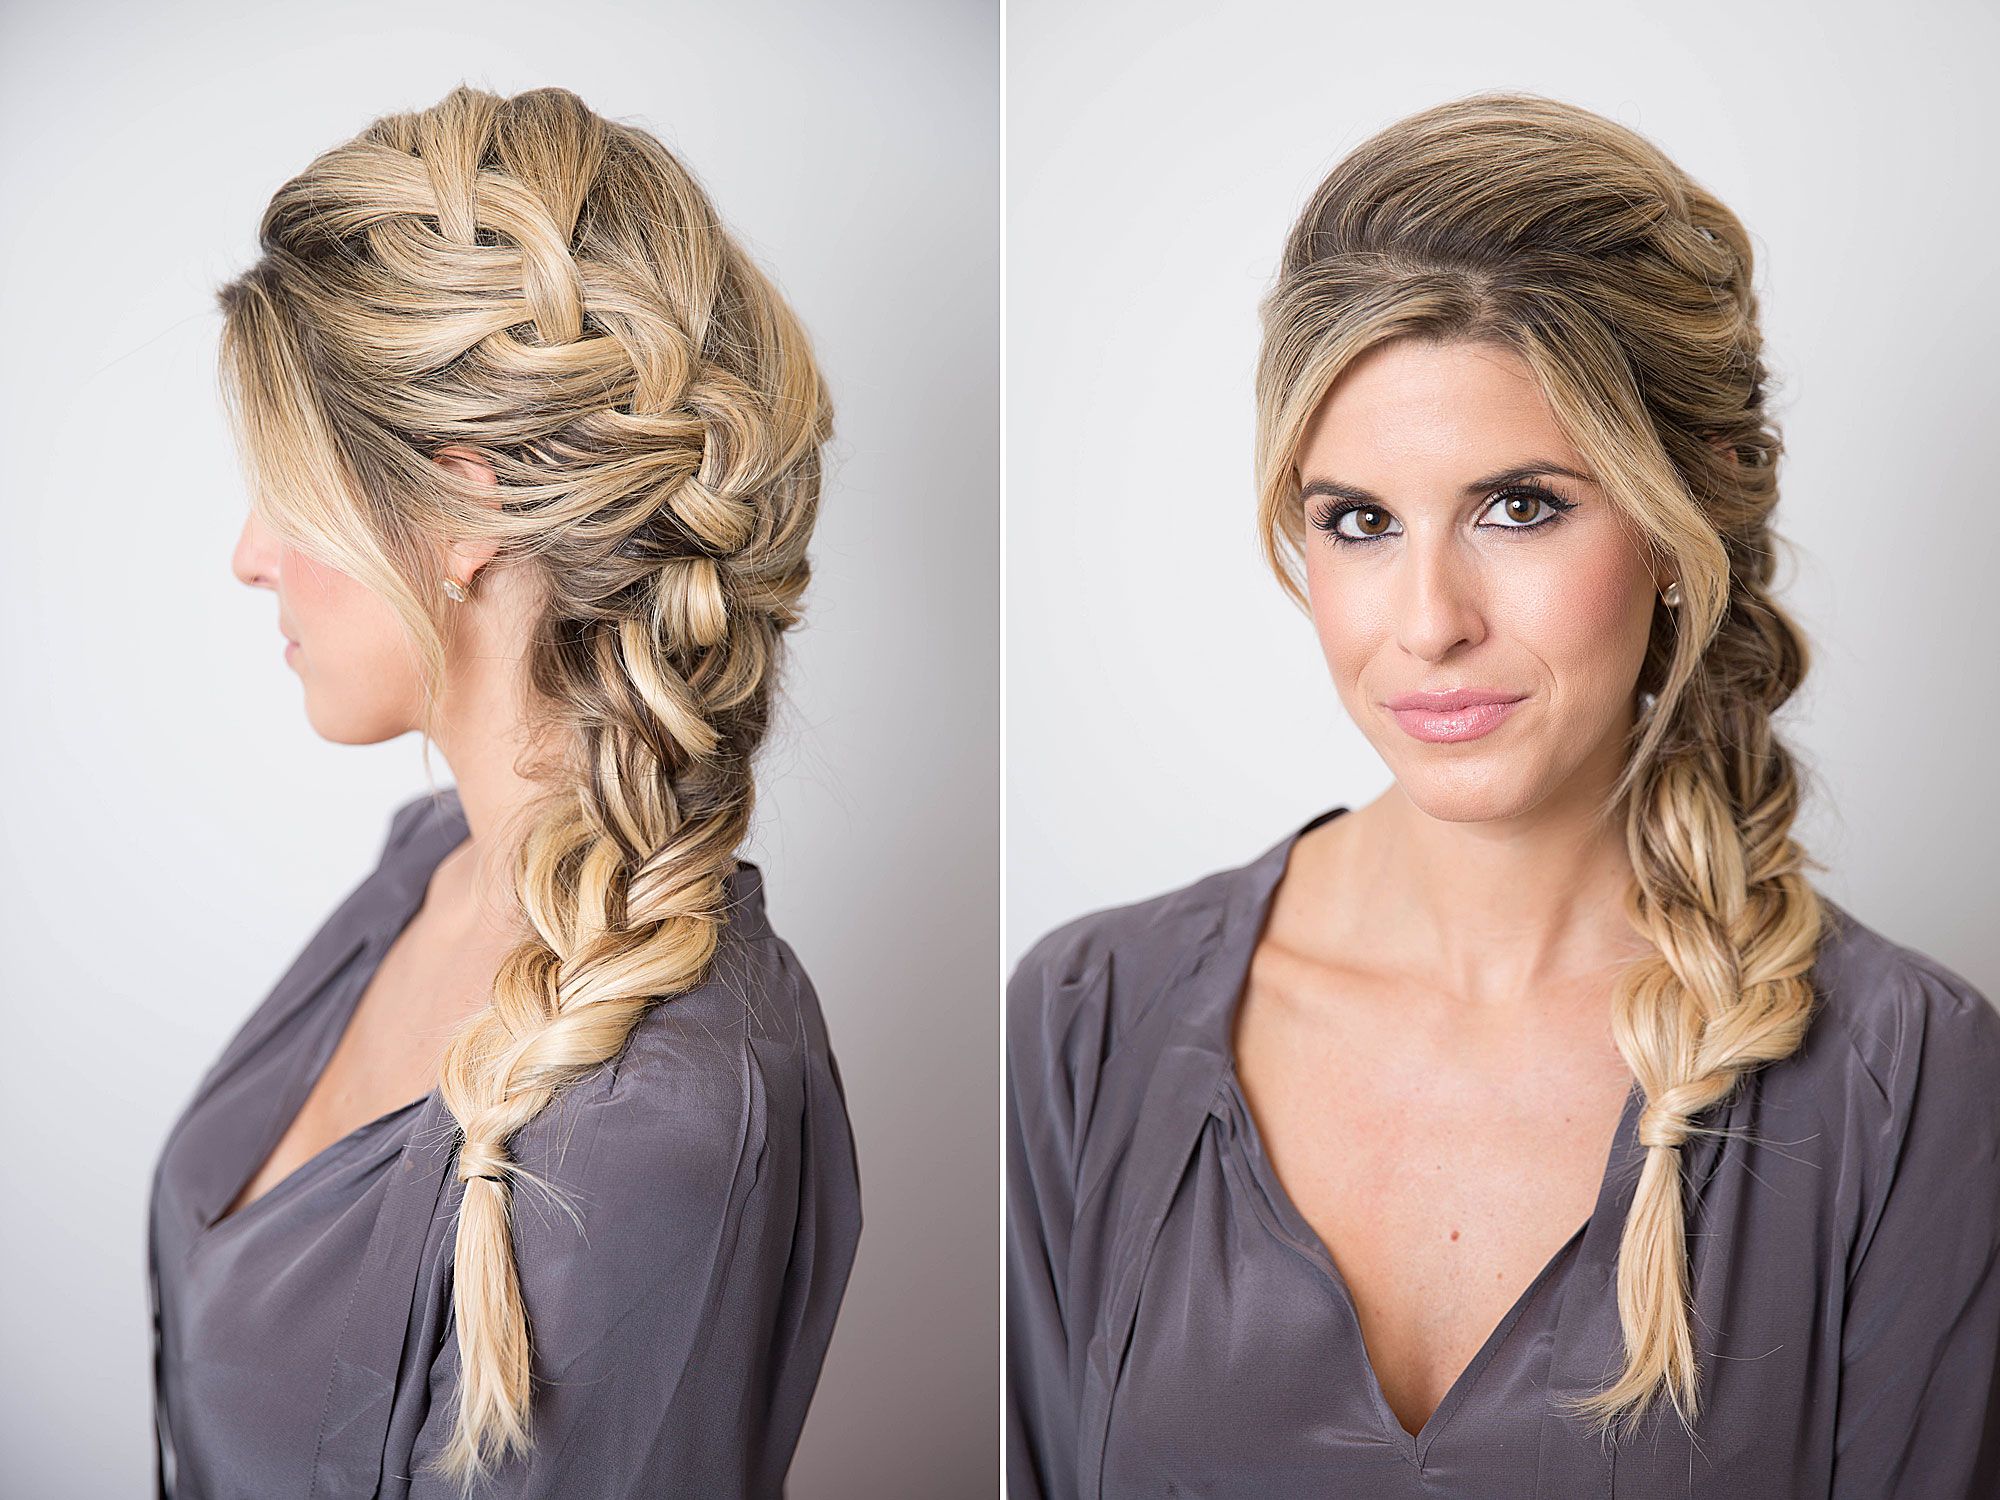 17 Braided Hairstyles With GIFS How To Do Every Type Of Braid